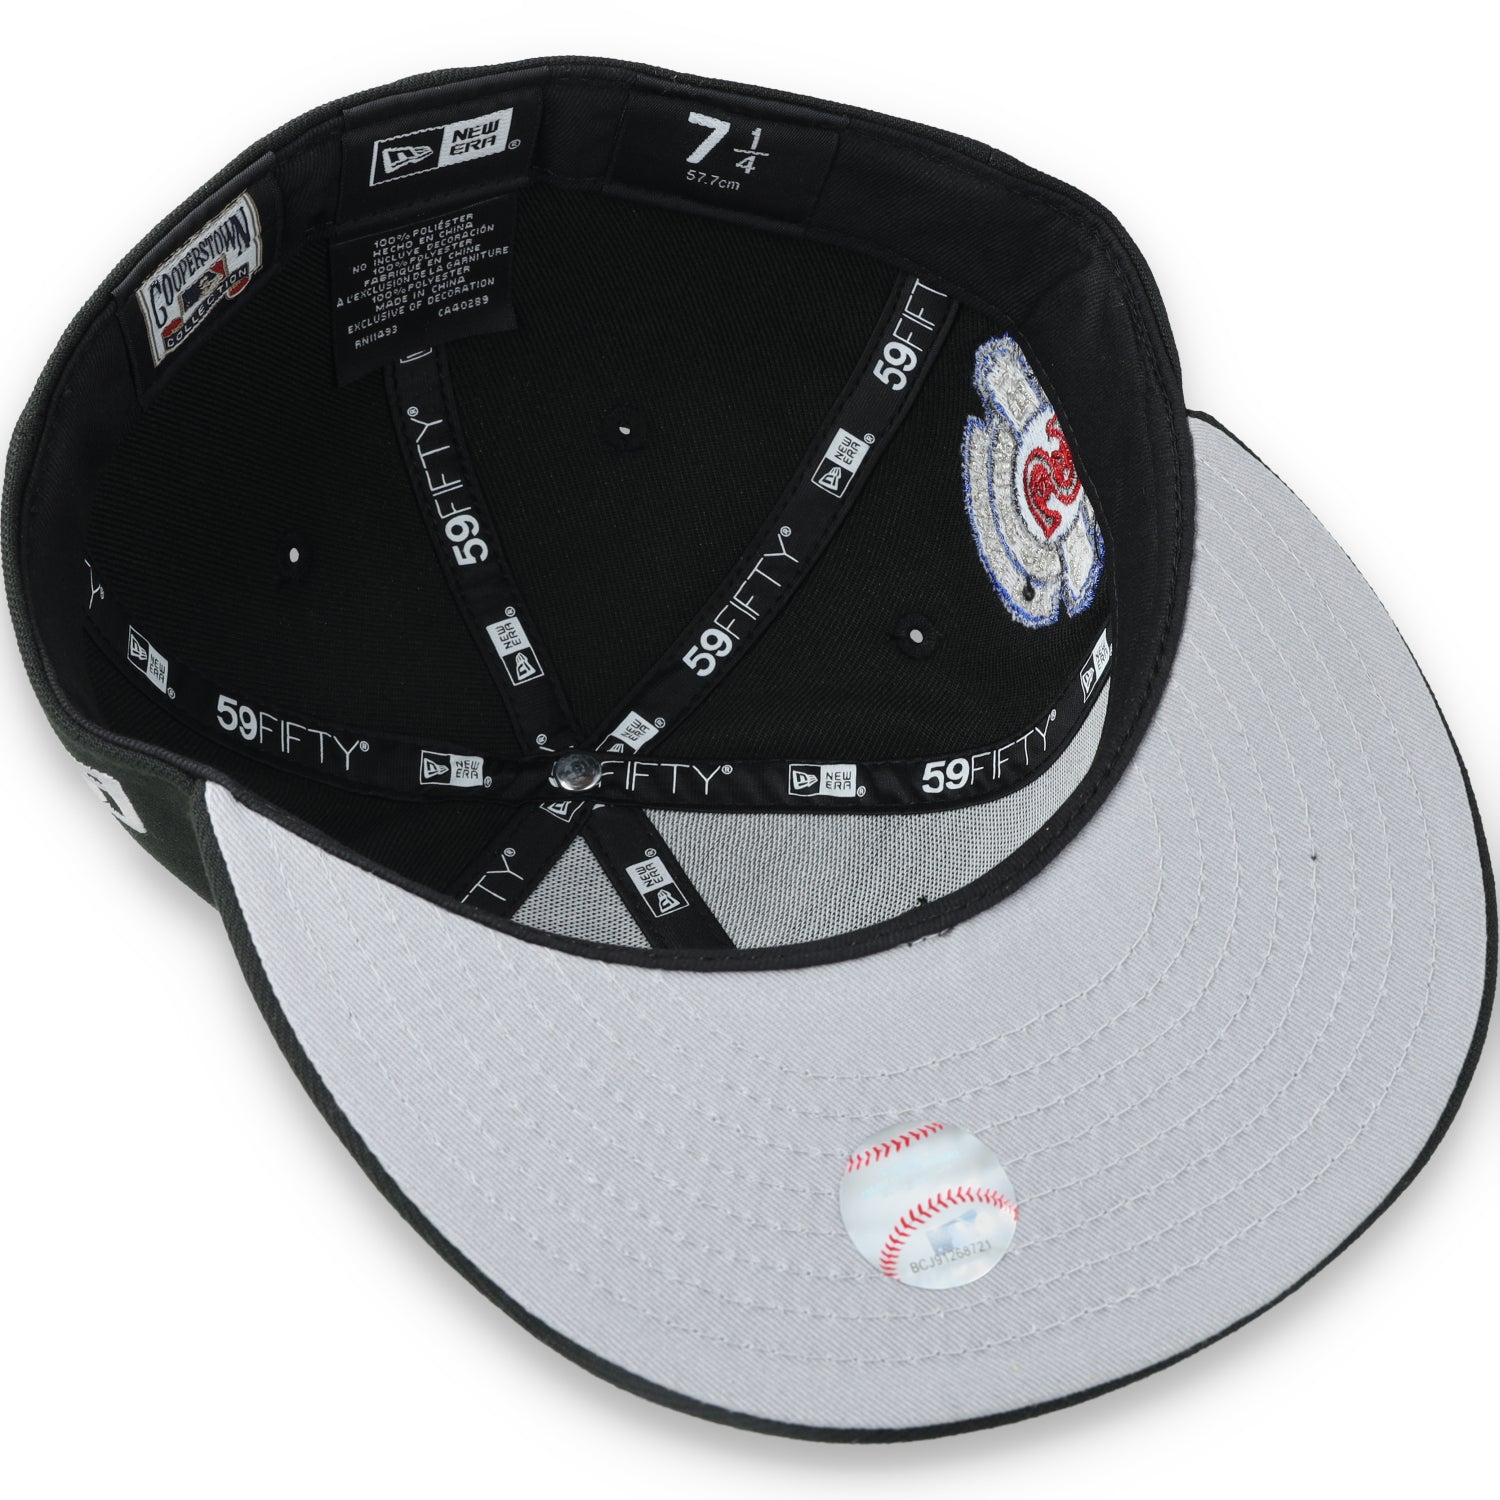 New Era Chicago White Sox 1917 World Series Side Patch 59FIFTY Fitted Hat-Metallic Grey/Black